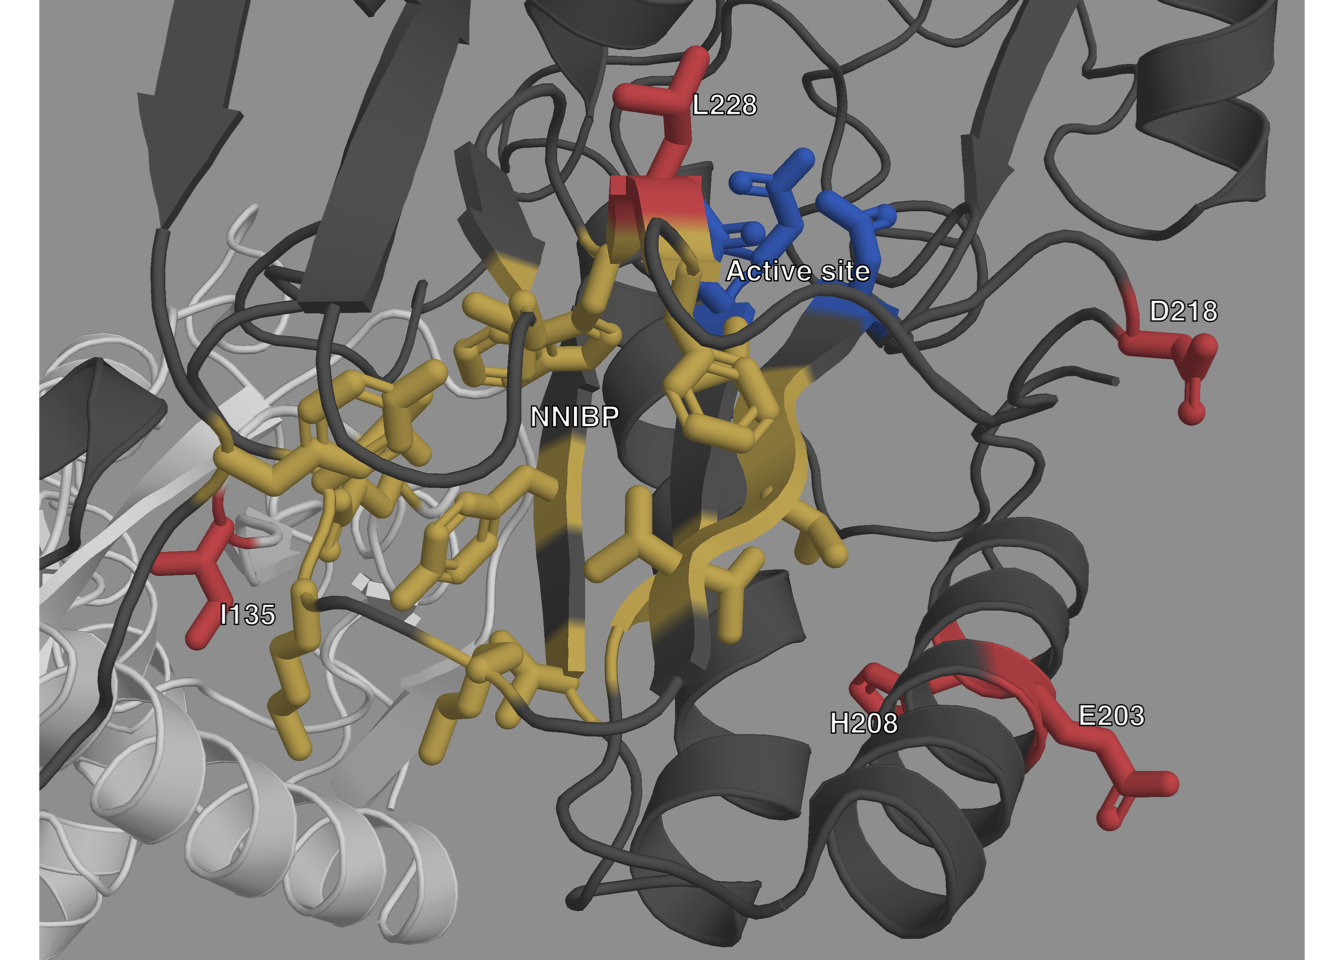 **Structure of HIV-1 RT with highlighted important sites.**  
The p66 subunit is colored dark gray and the p51 subunit white. The active site
is highlighted in blue, and the NNIBP is highlighted in yellow. The
sites of new mutations are colored in
red.